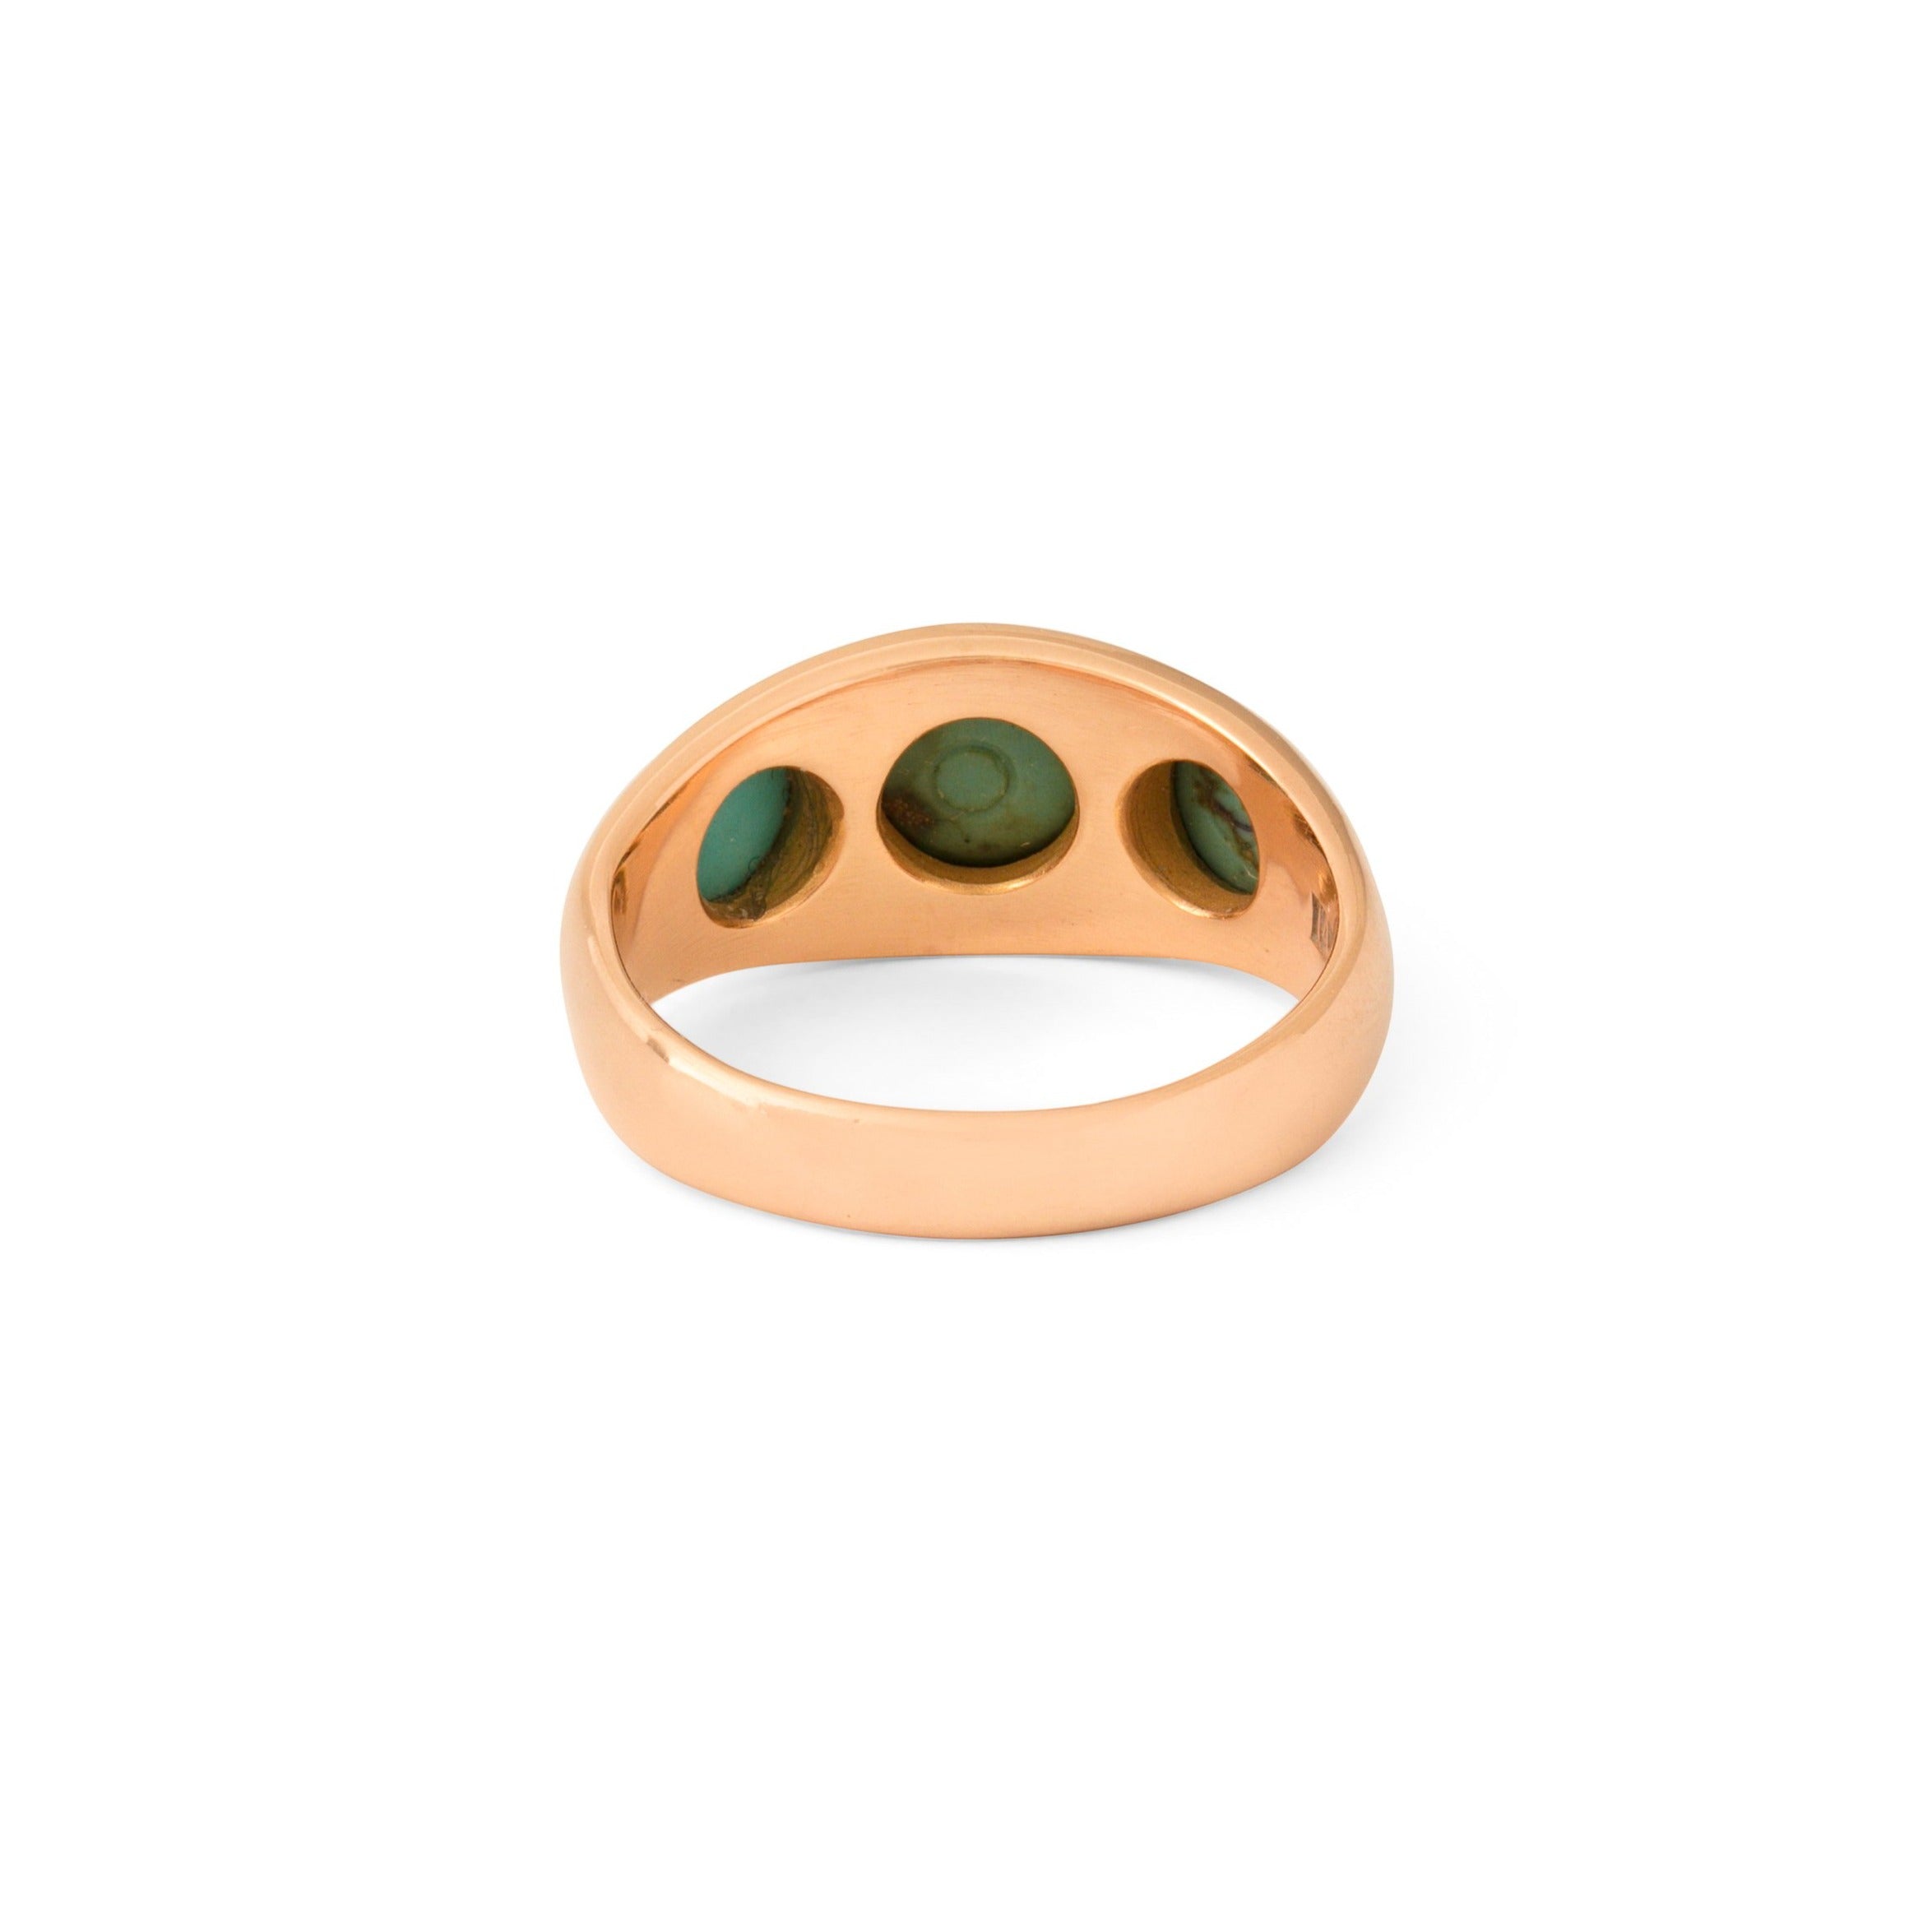 Three-Stone Turquoise and 14k Rose Gold Gypsy Ring